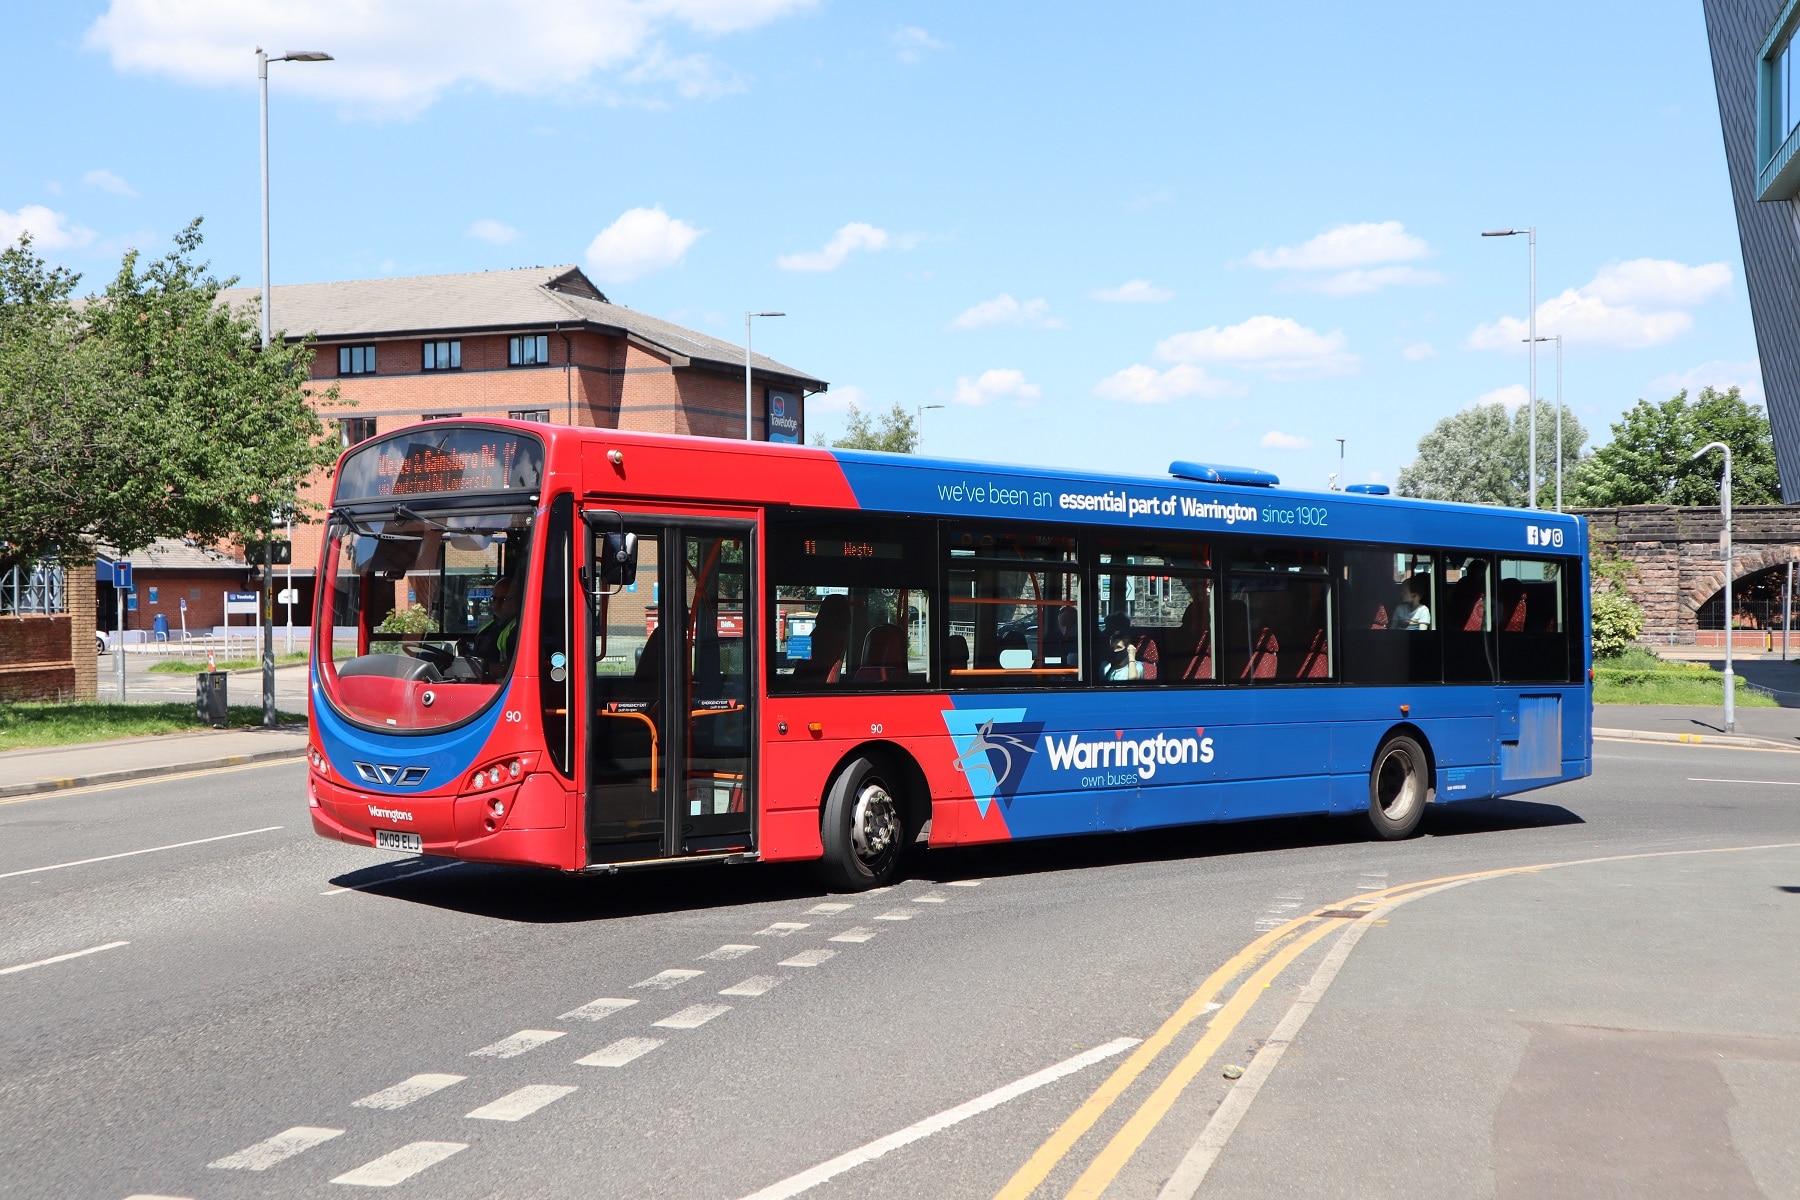 Bus recovery funding for England